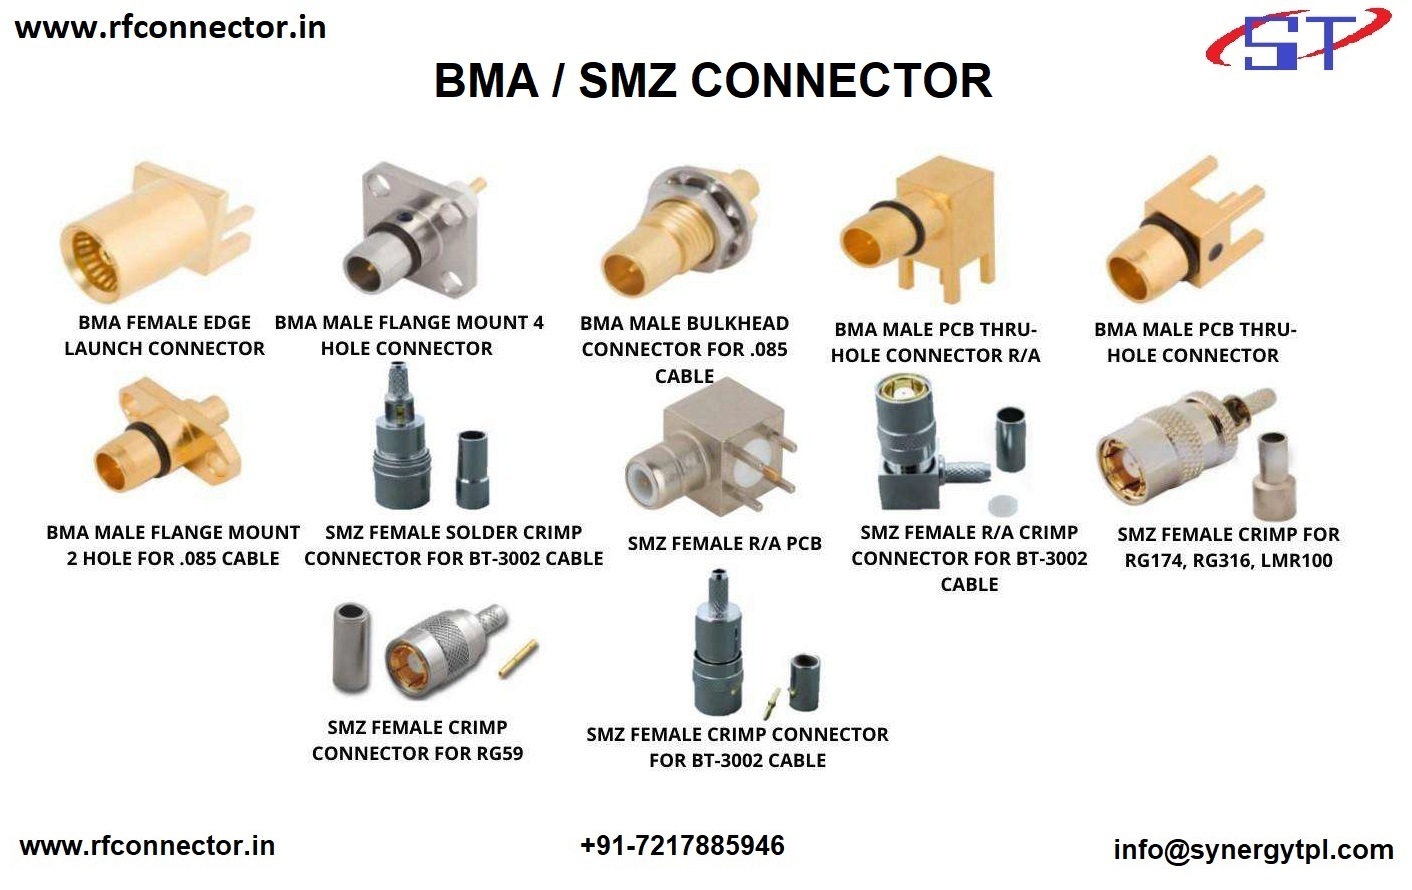 TNC male crimp connector for LMR 100 cable